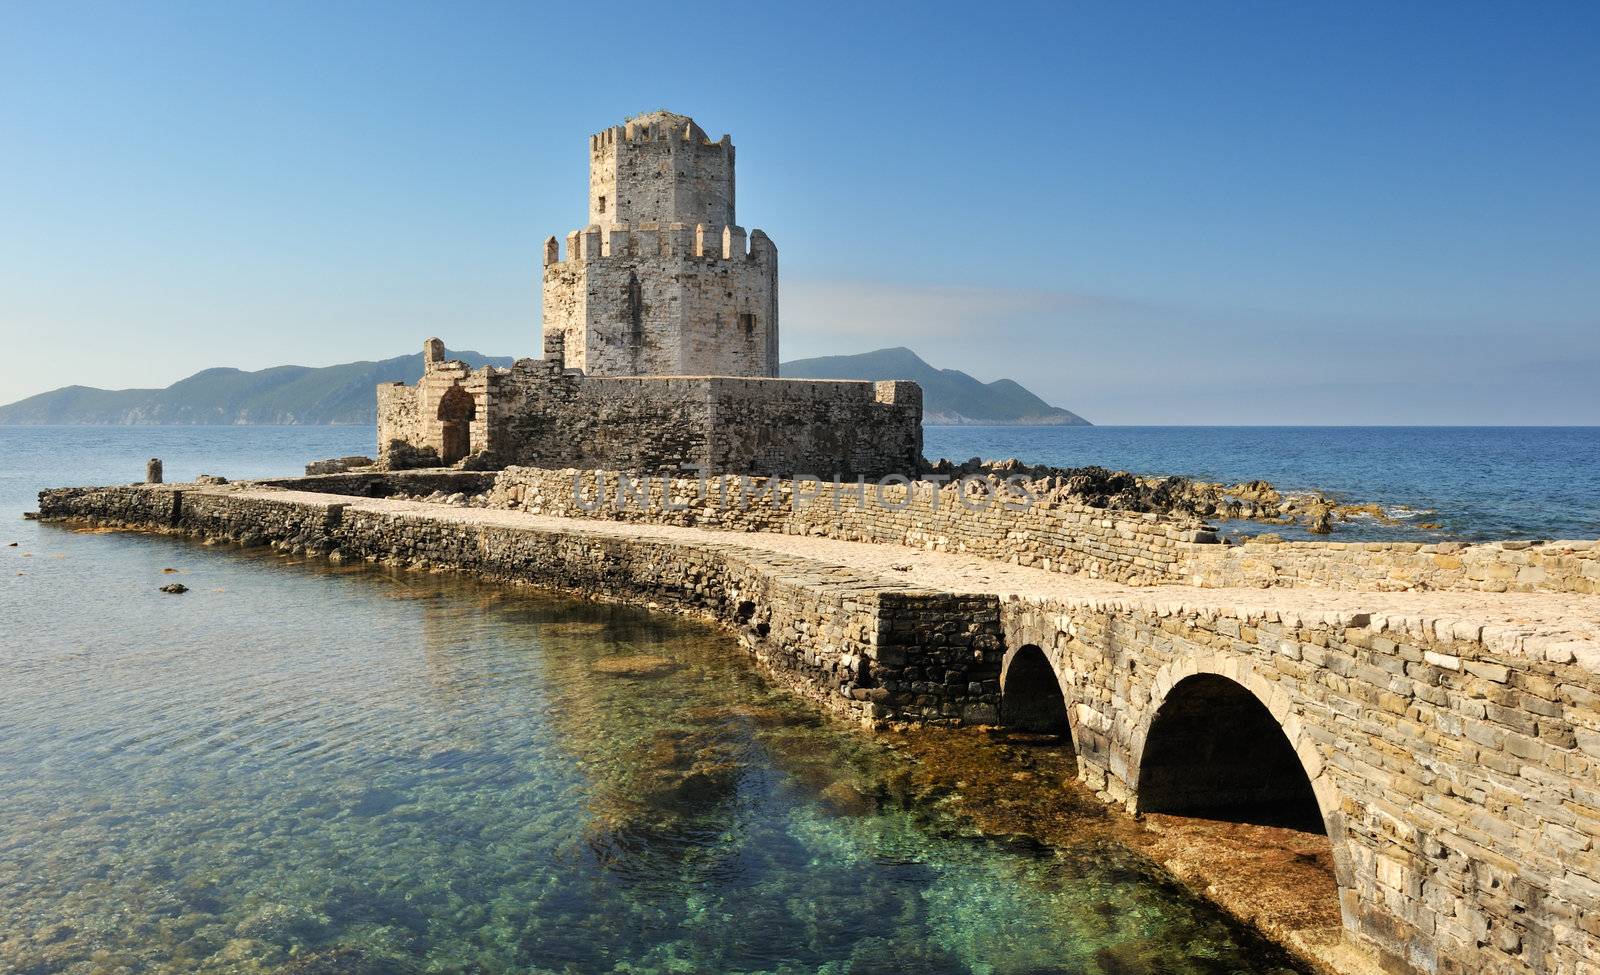 Picture of the watchtower from the medieval castle at Methoni, southern Greece, as it extends into the sea.